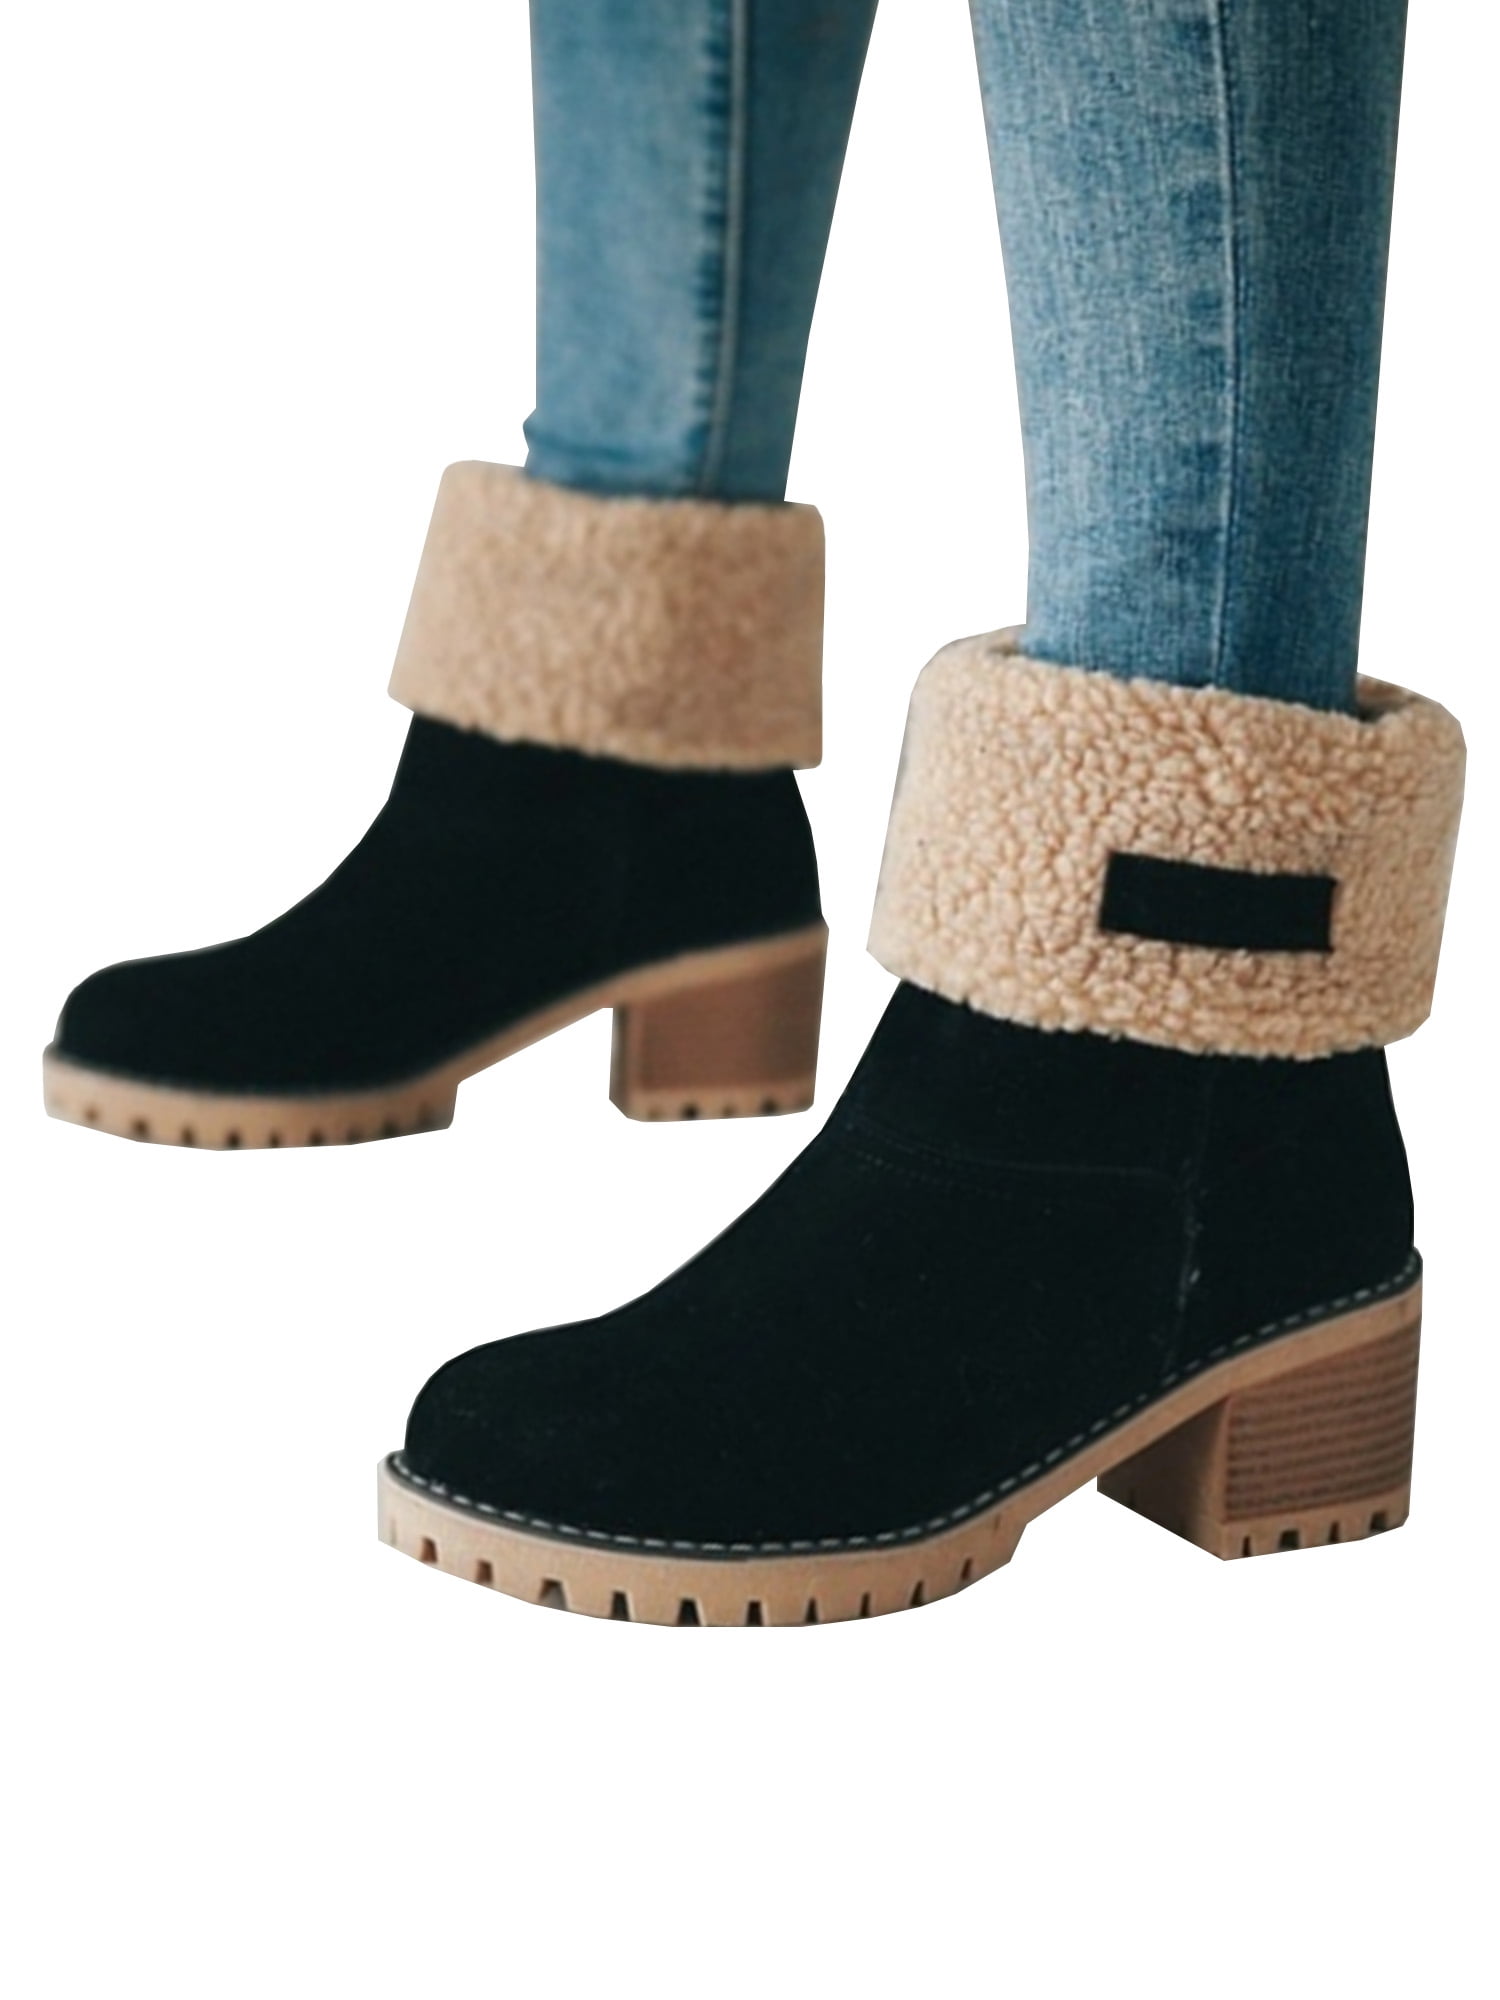 Women's Winter Warm Snow Boots Mid Calf Pull On Fur Chunky Low Heel Shoes 